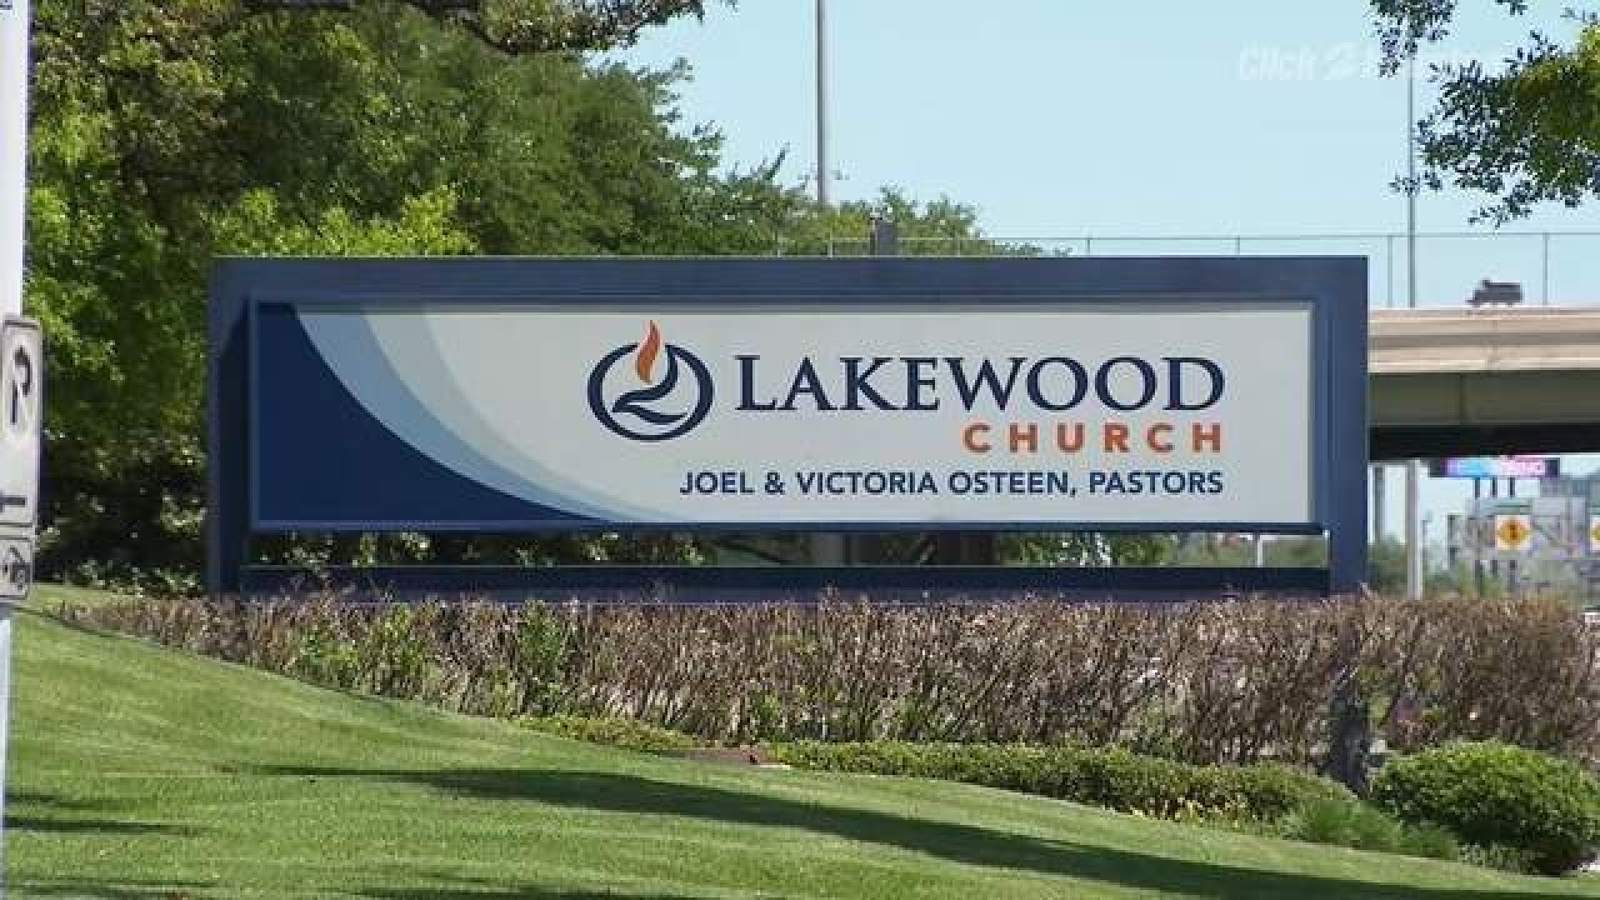 Lakewood Church resumes in-person services today